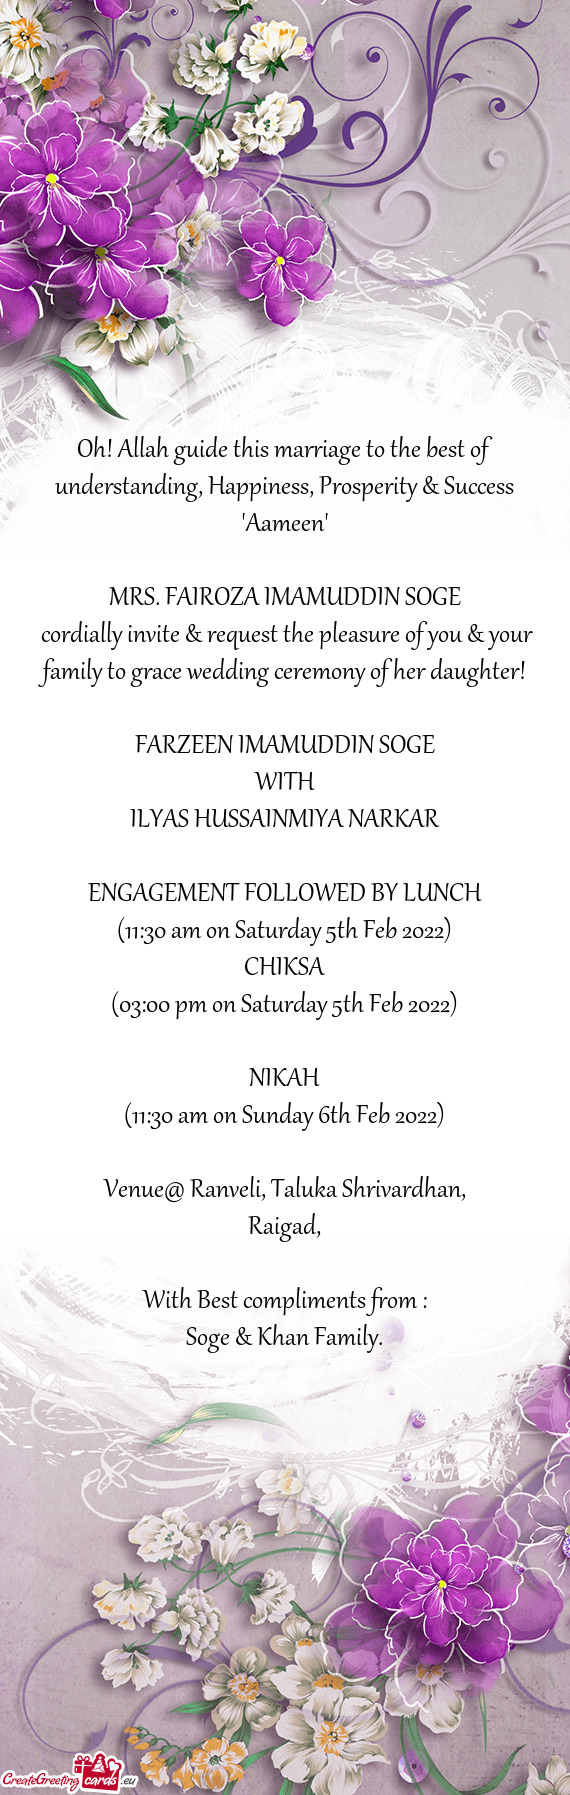 ENGAGEMENT FOLLOWED BY LUNCH